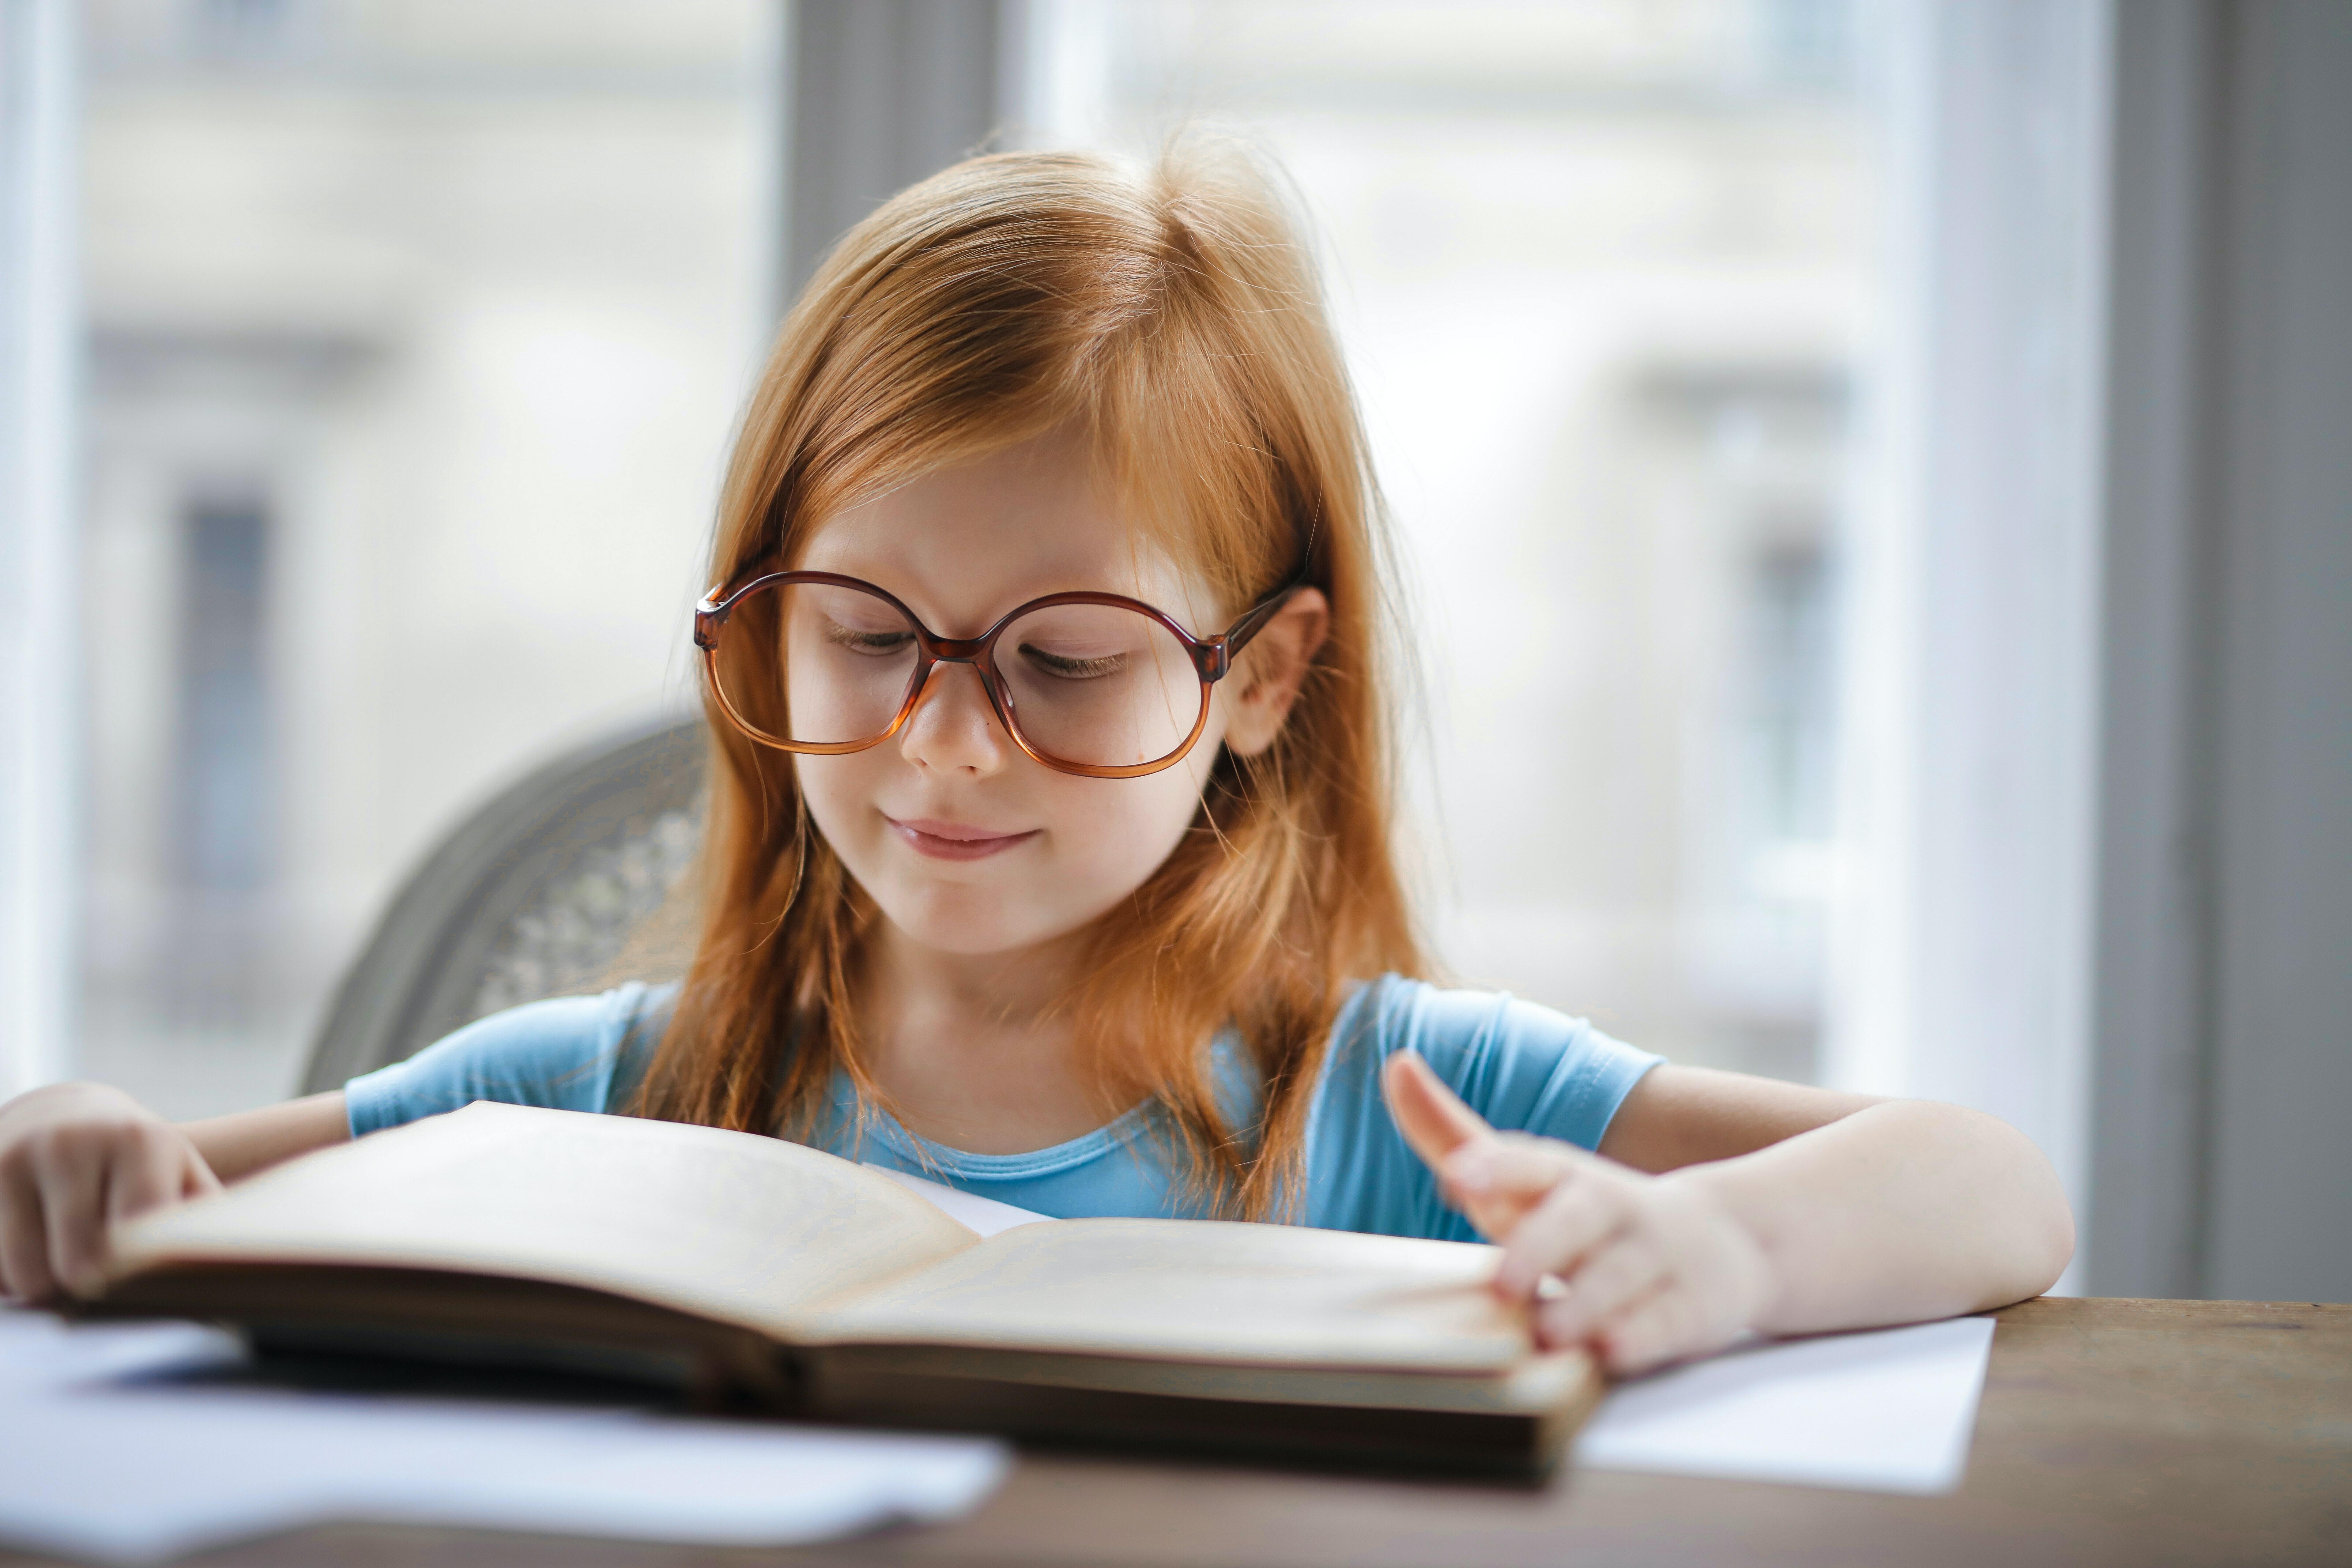 A little female child wearing glasses with book in front